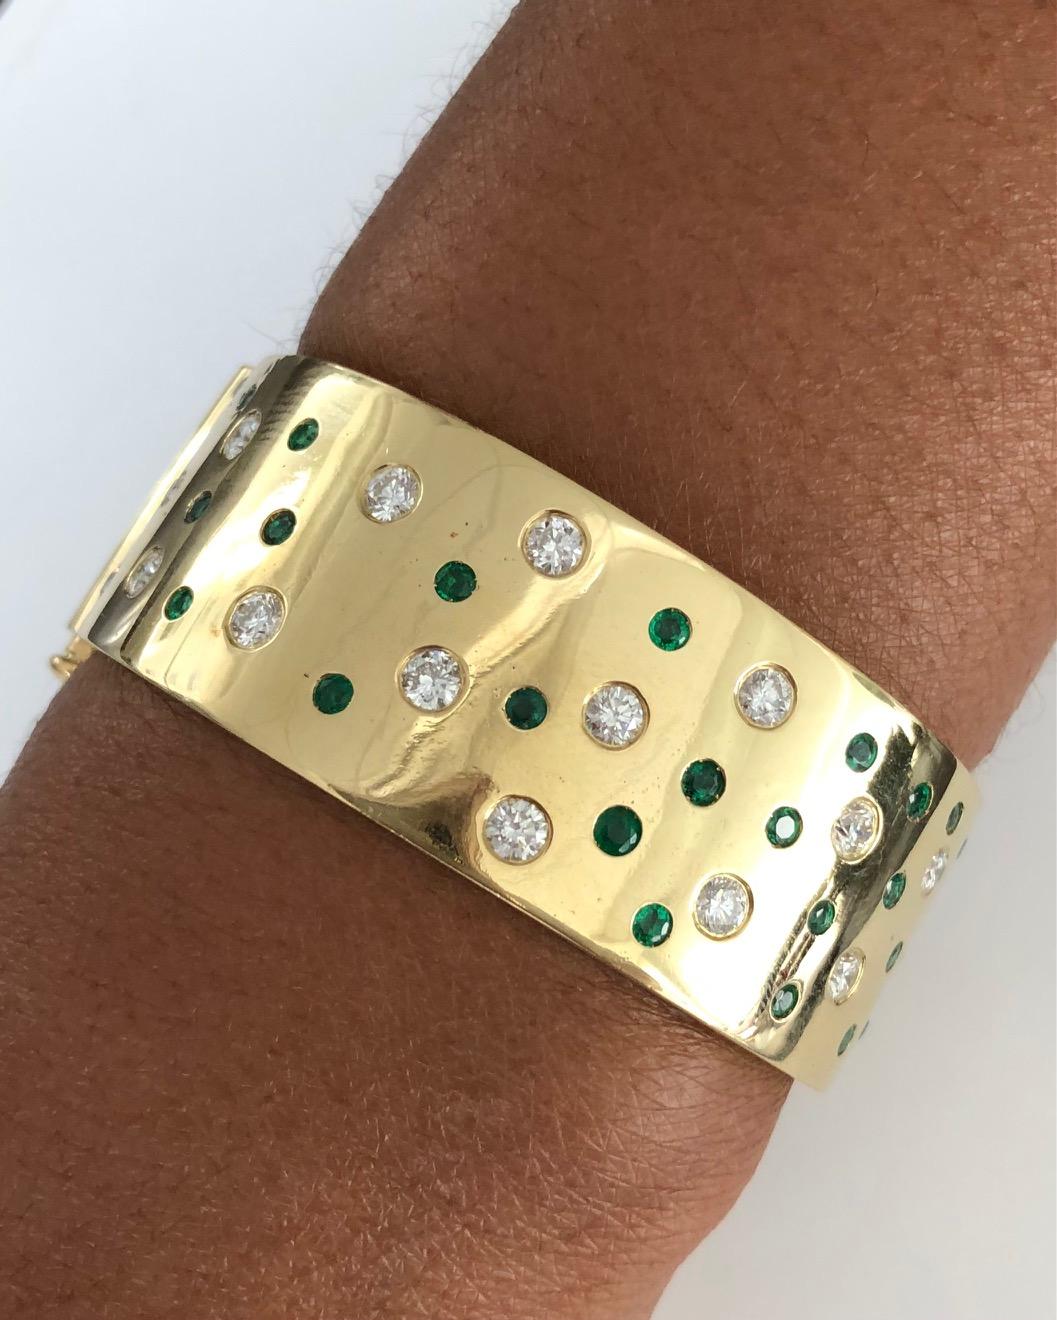 Fashionable wide Bangle Bracelet, made in 18K Yellow Gold, set with a combination of Diamonds( 2.61 carats ) and Emeralds ( 1.60 carats ), featuring our easy push-button opener.
Bracelet width: 7/7 inch ( 2.3 CM )

We design and manufacture our